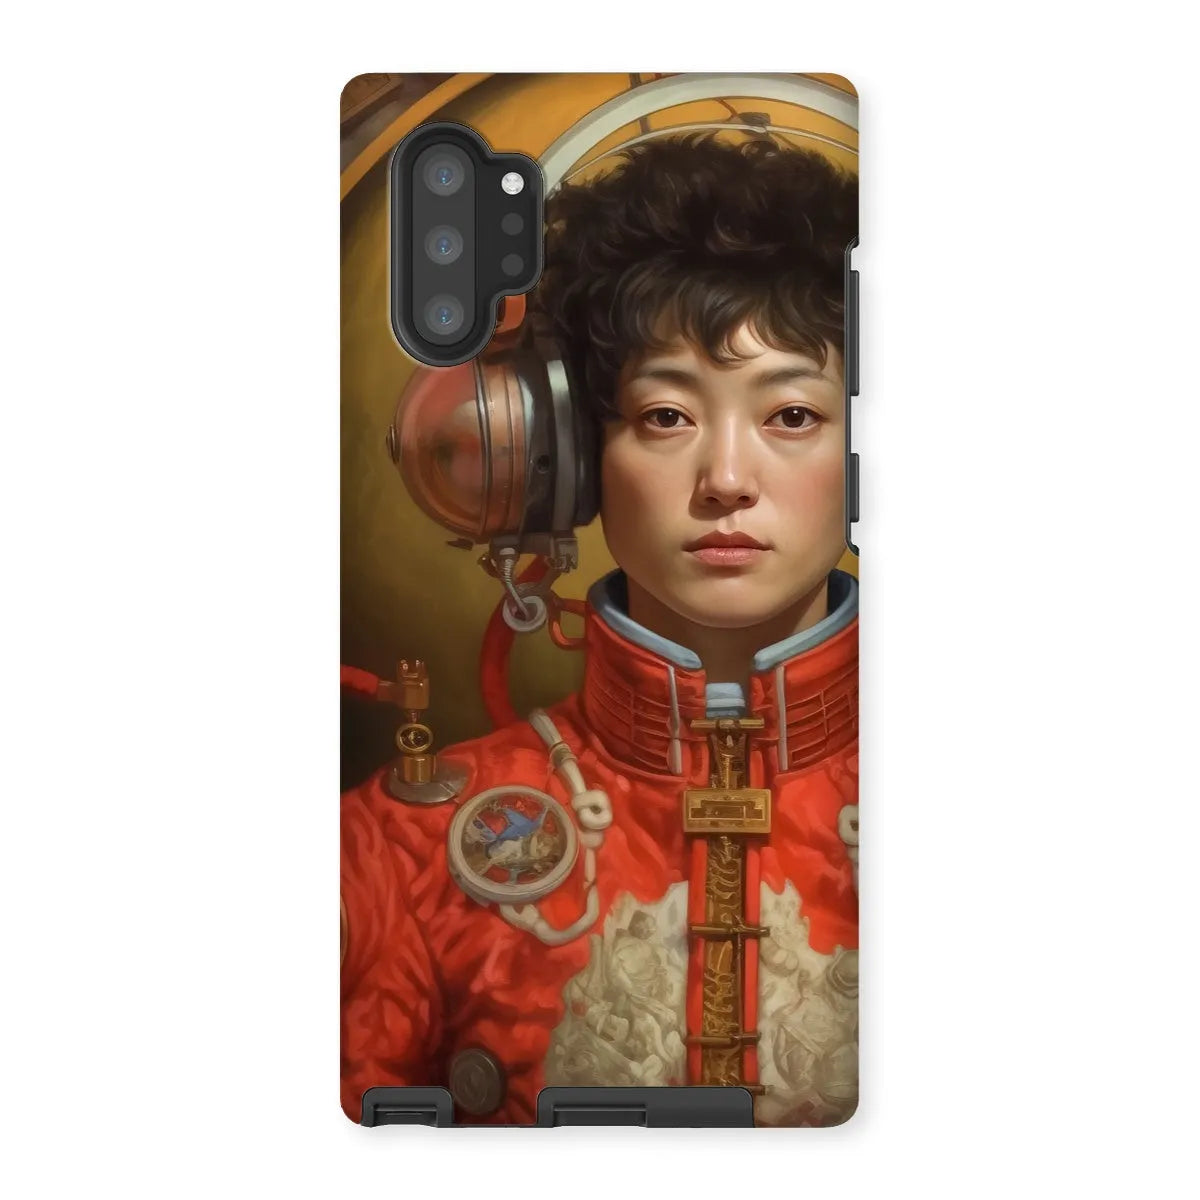 Mùchén - Gay Chinese Astronaut Aesthetic Phone Case - Samsung Galaxy Note 10p / Matte - Mobile Phone Cases